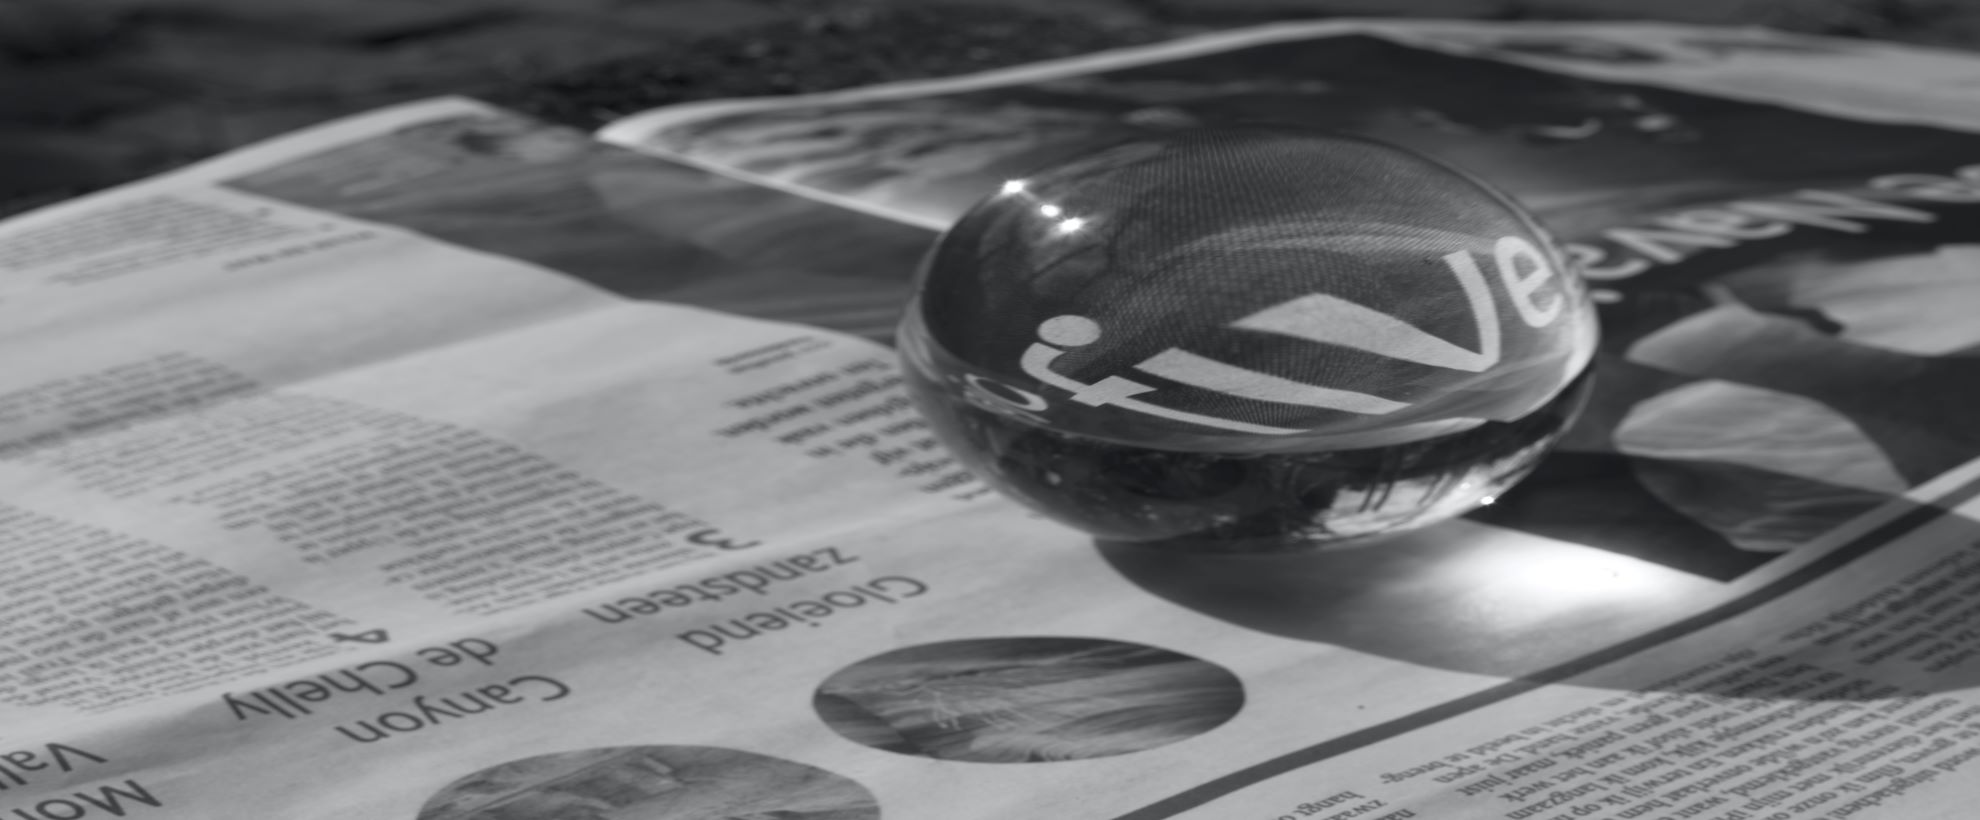 newspaper with crystal ball